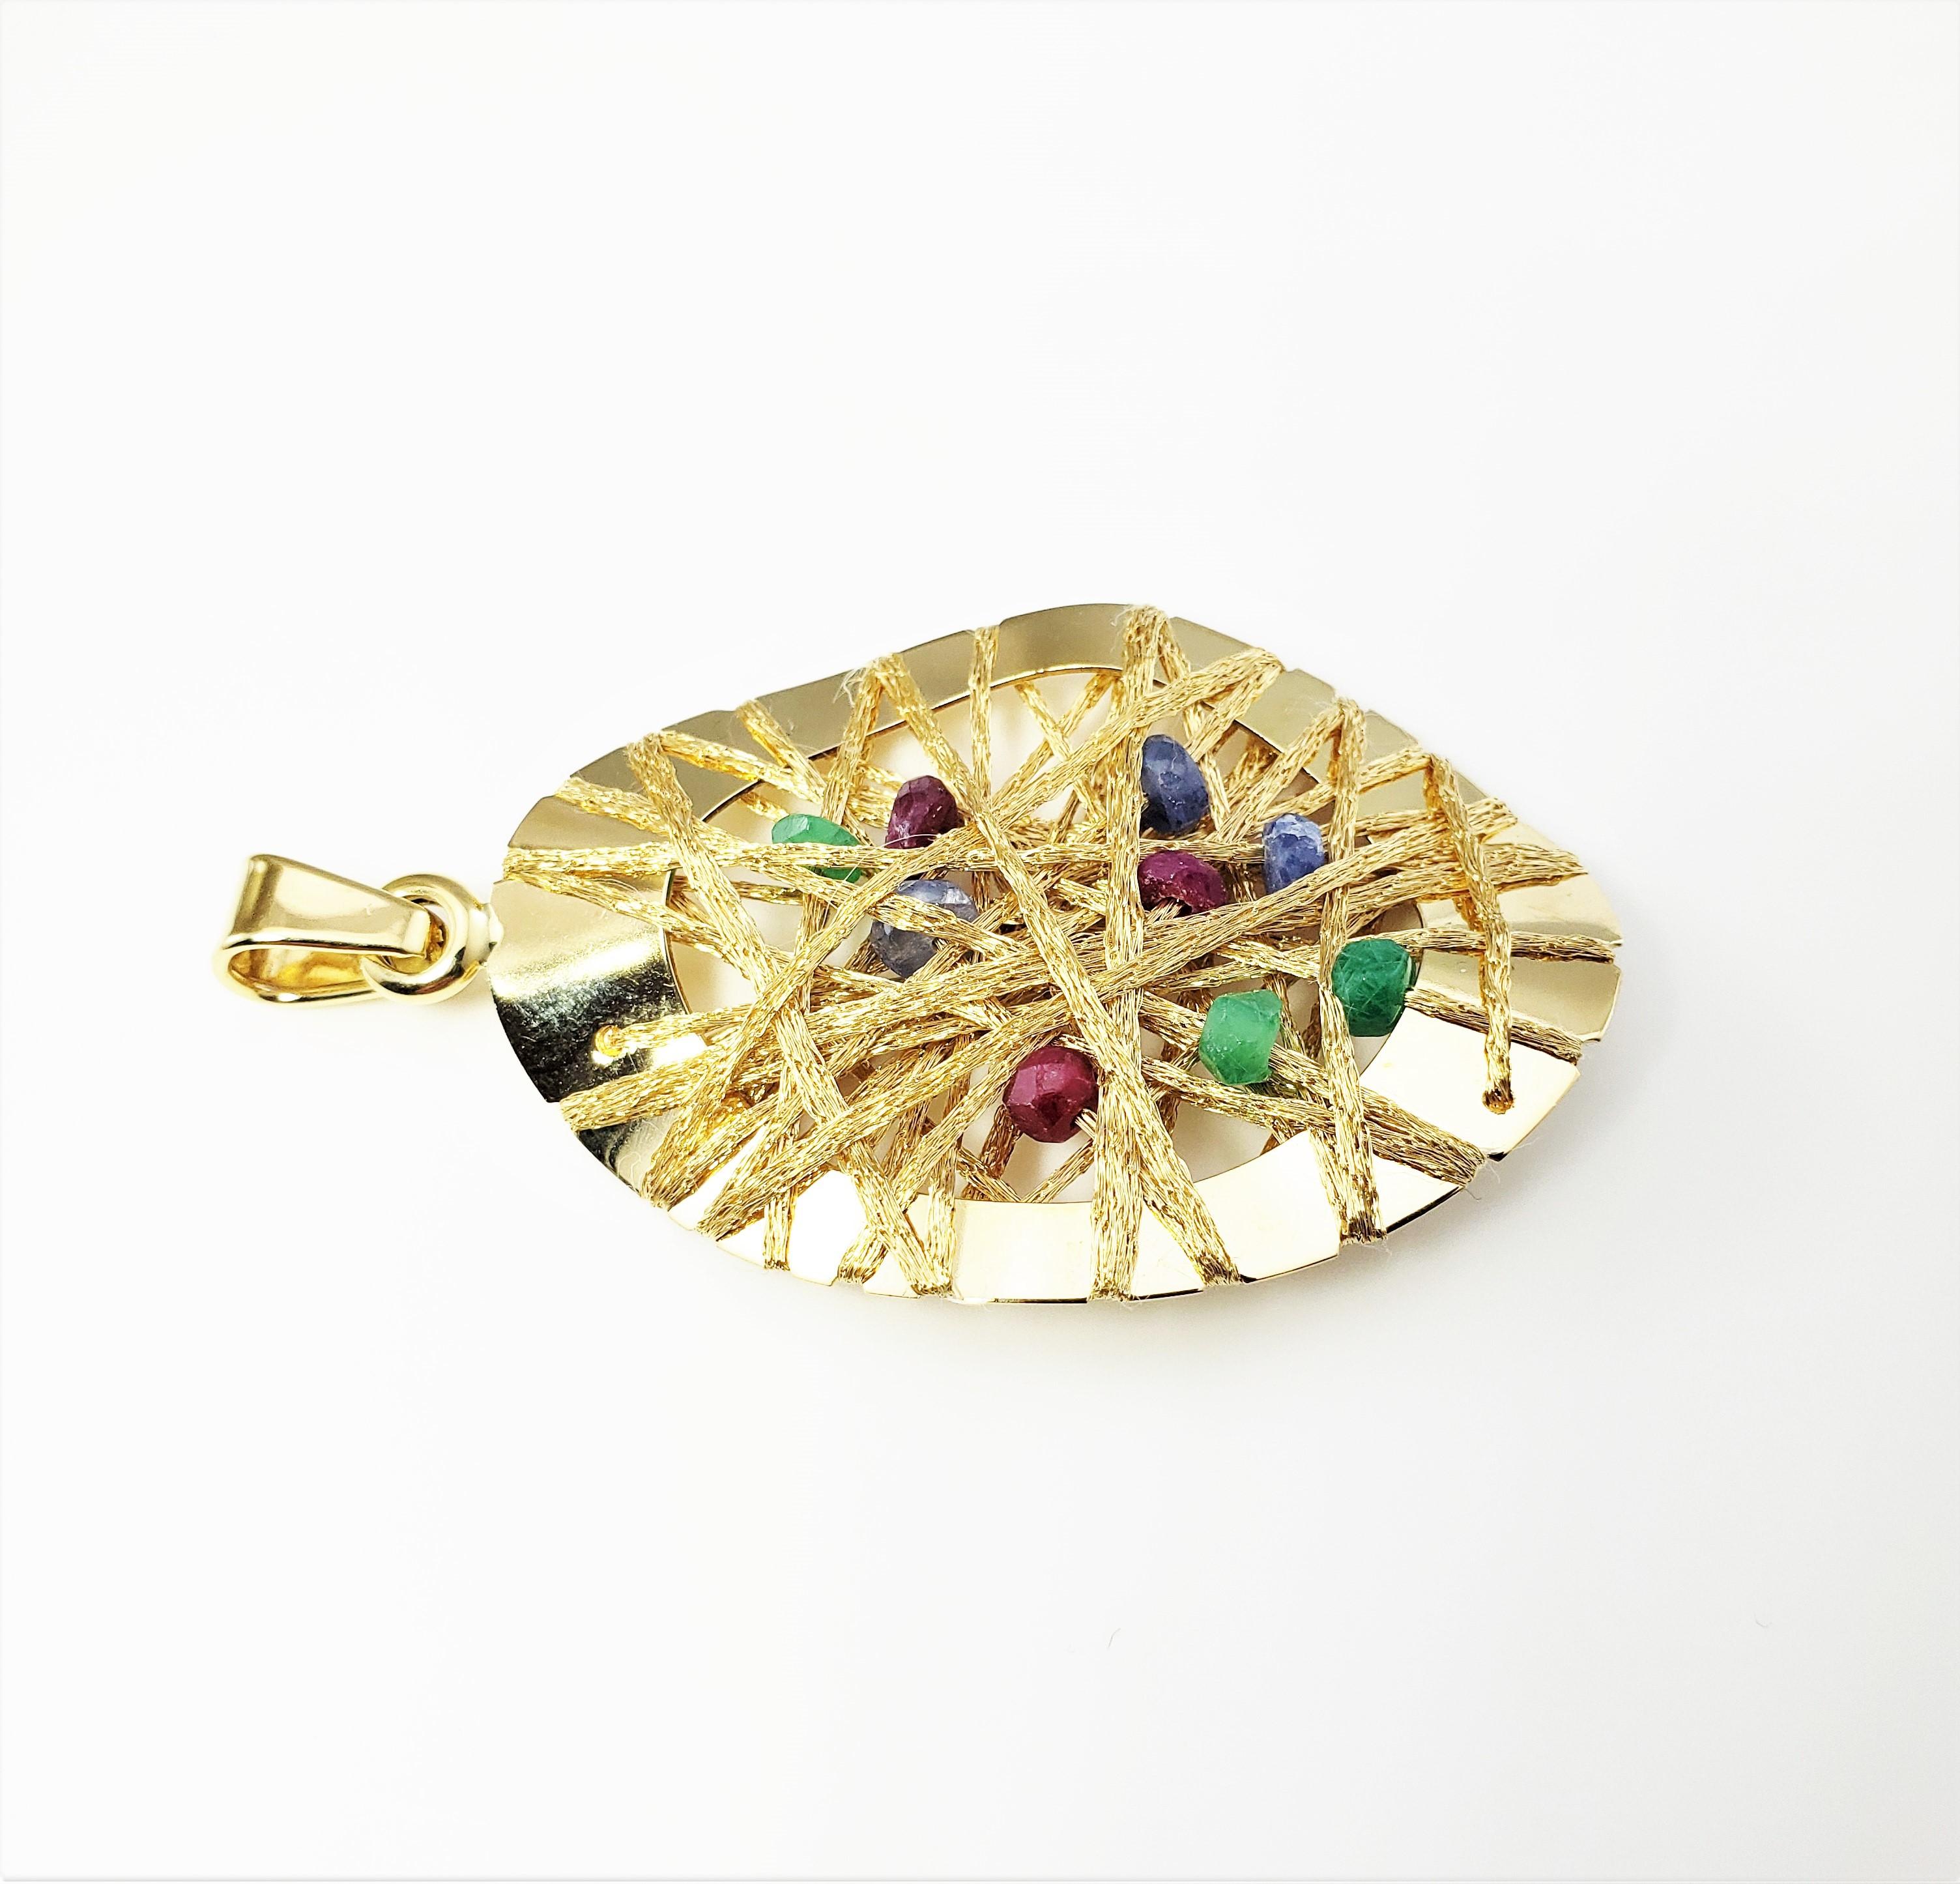 Vintage 18 Karat Yellow Gold and Multi-Colored Gemstone Pendant-

This spectacular pendant is crafted in a unique string design in beautifully detailed 18K yellow gold. Decorated with nine rough-cut gemstones (three rubies, three sapphires and three